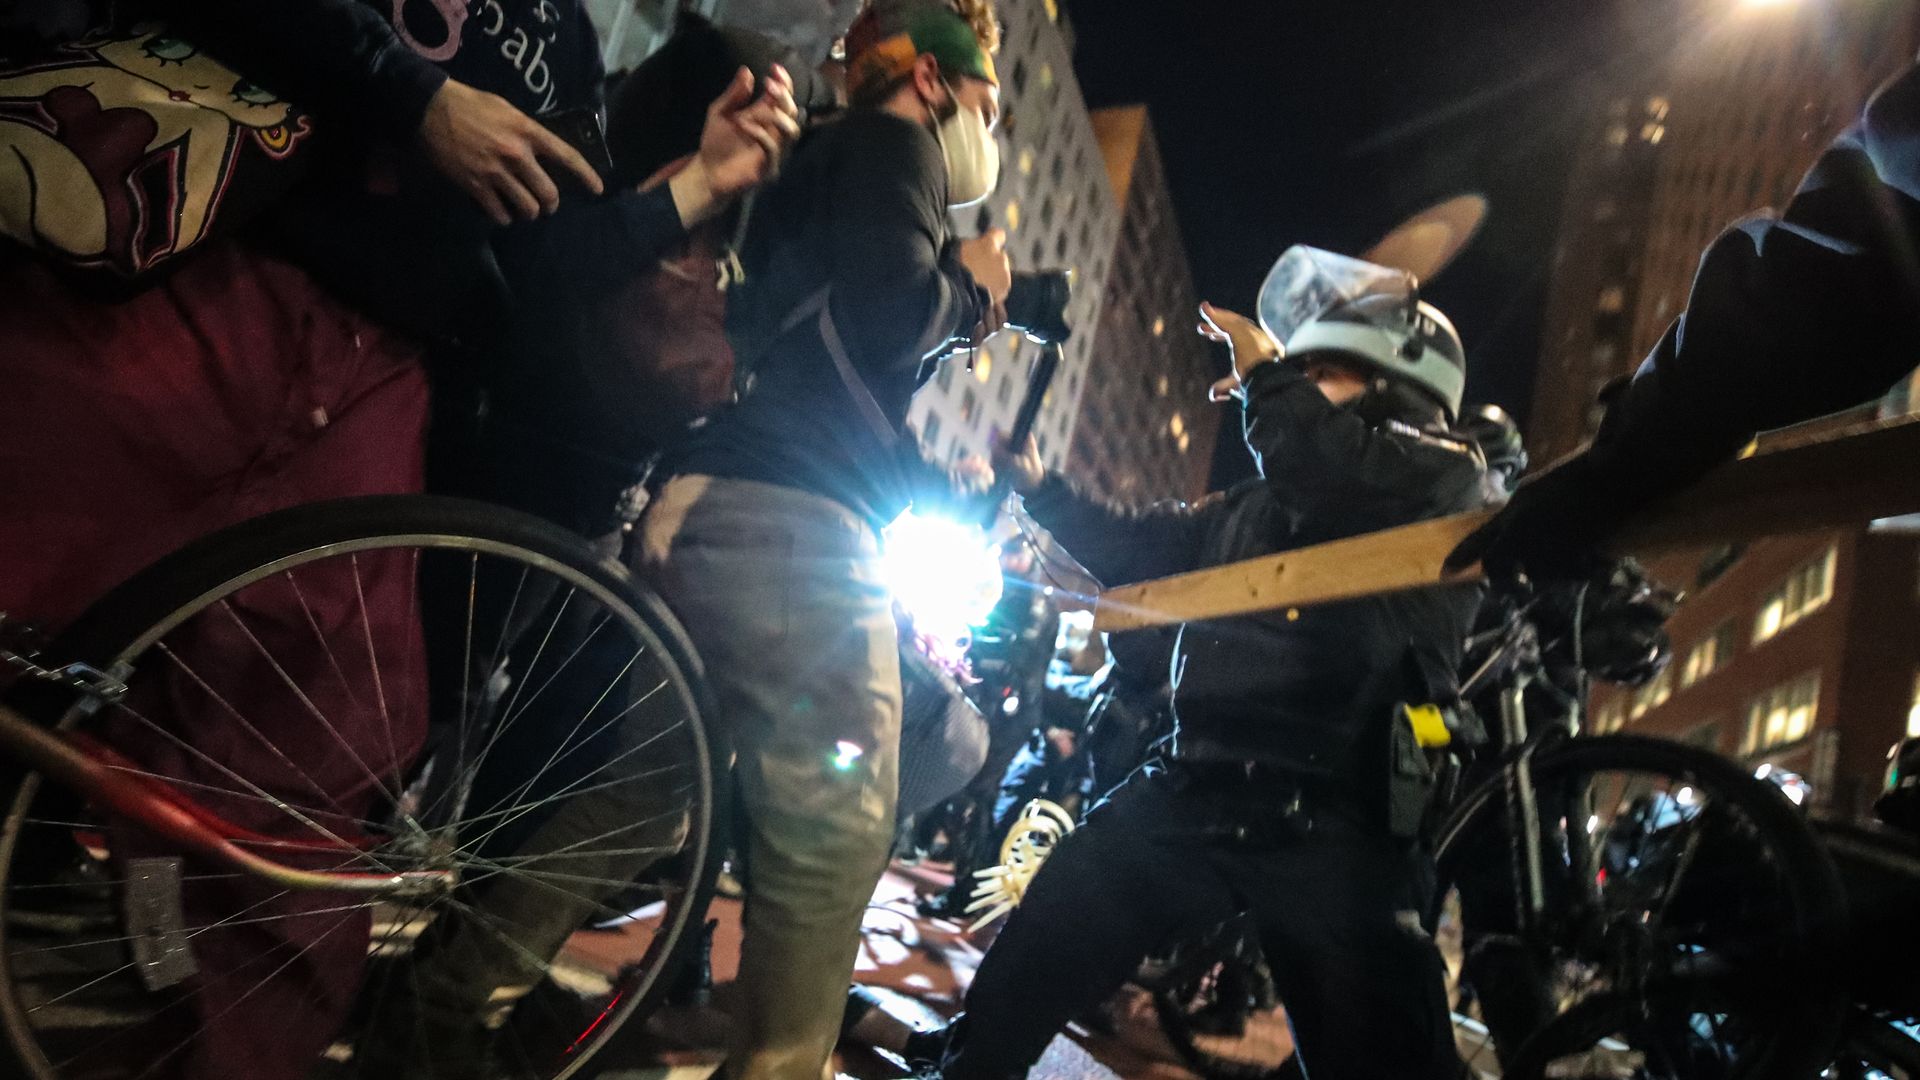 Police clash with election protestors who were marched streets in Manhattan of New York City